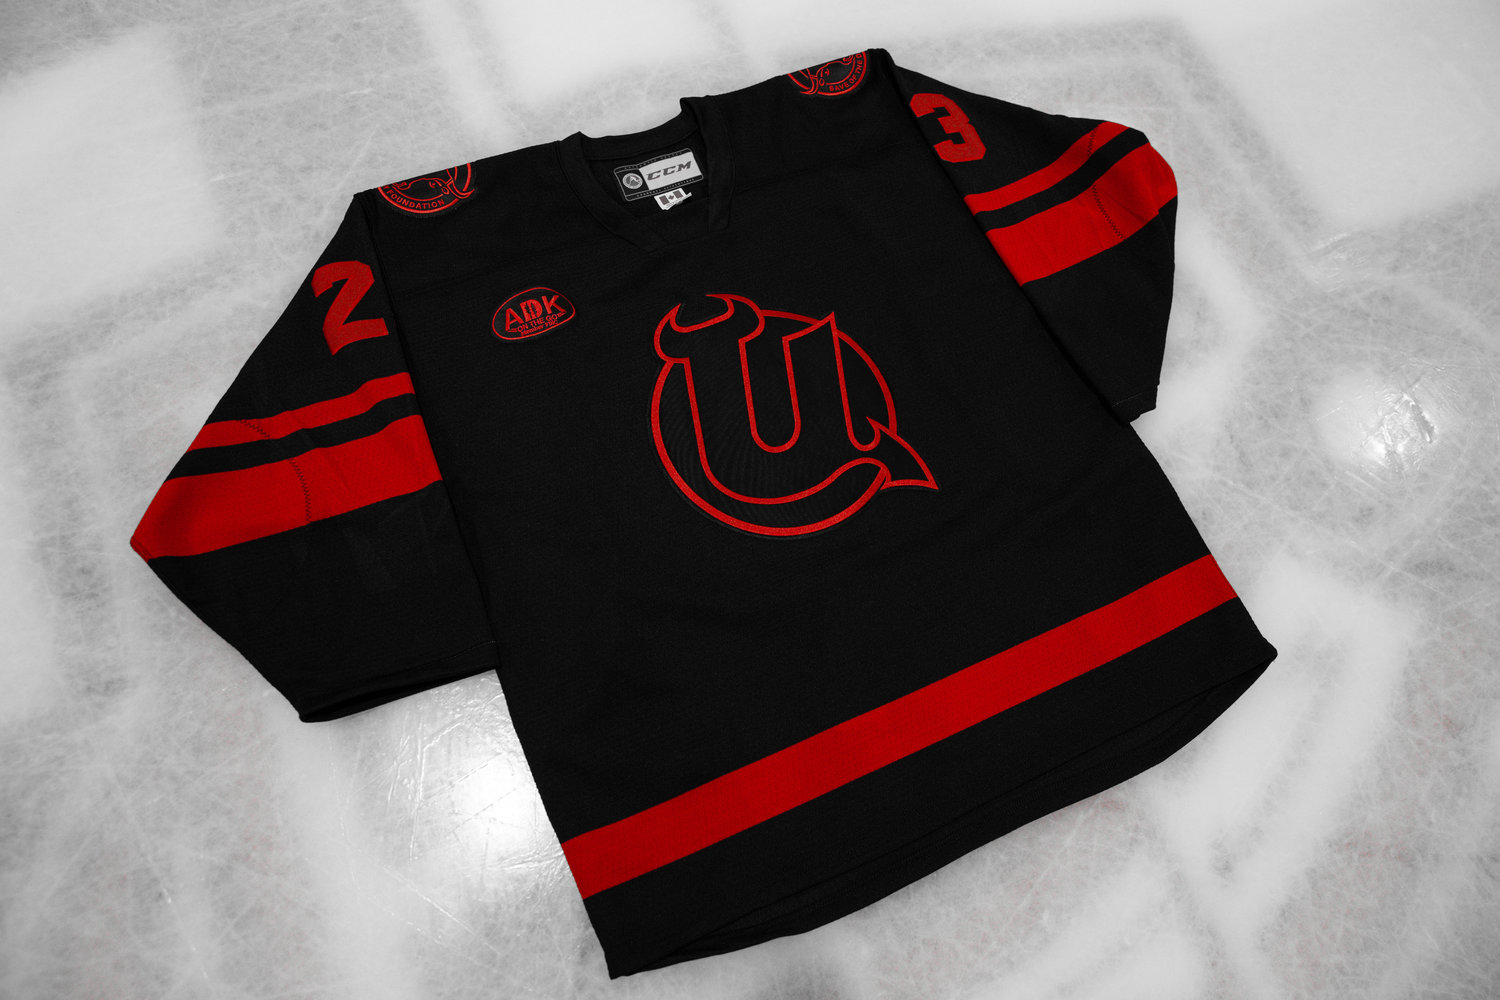 The Utica Comets are set to wear this special jersey for their game Wednesday against Charlotte and Saturday against Providence as part of the annual Save of the Day Foundation games.